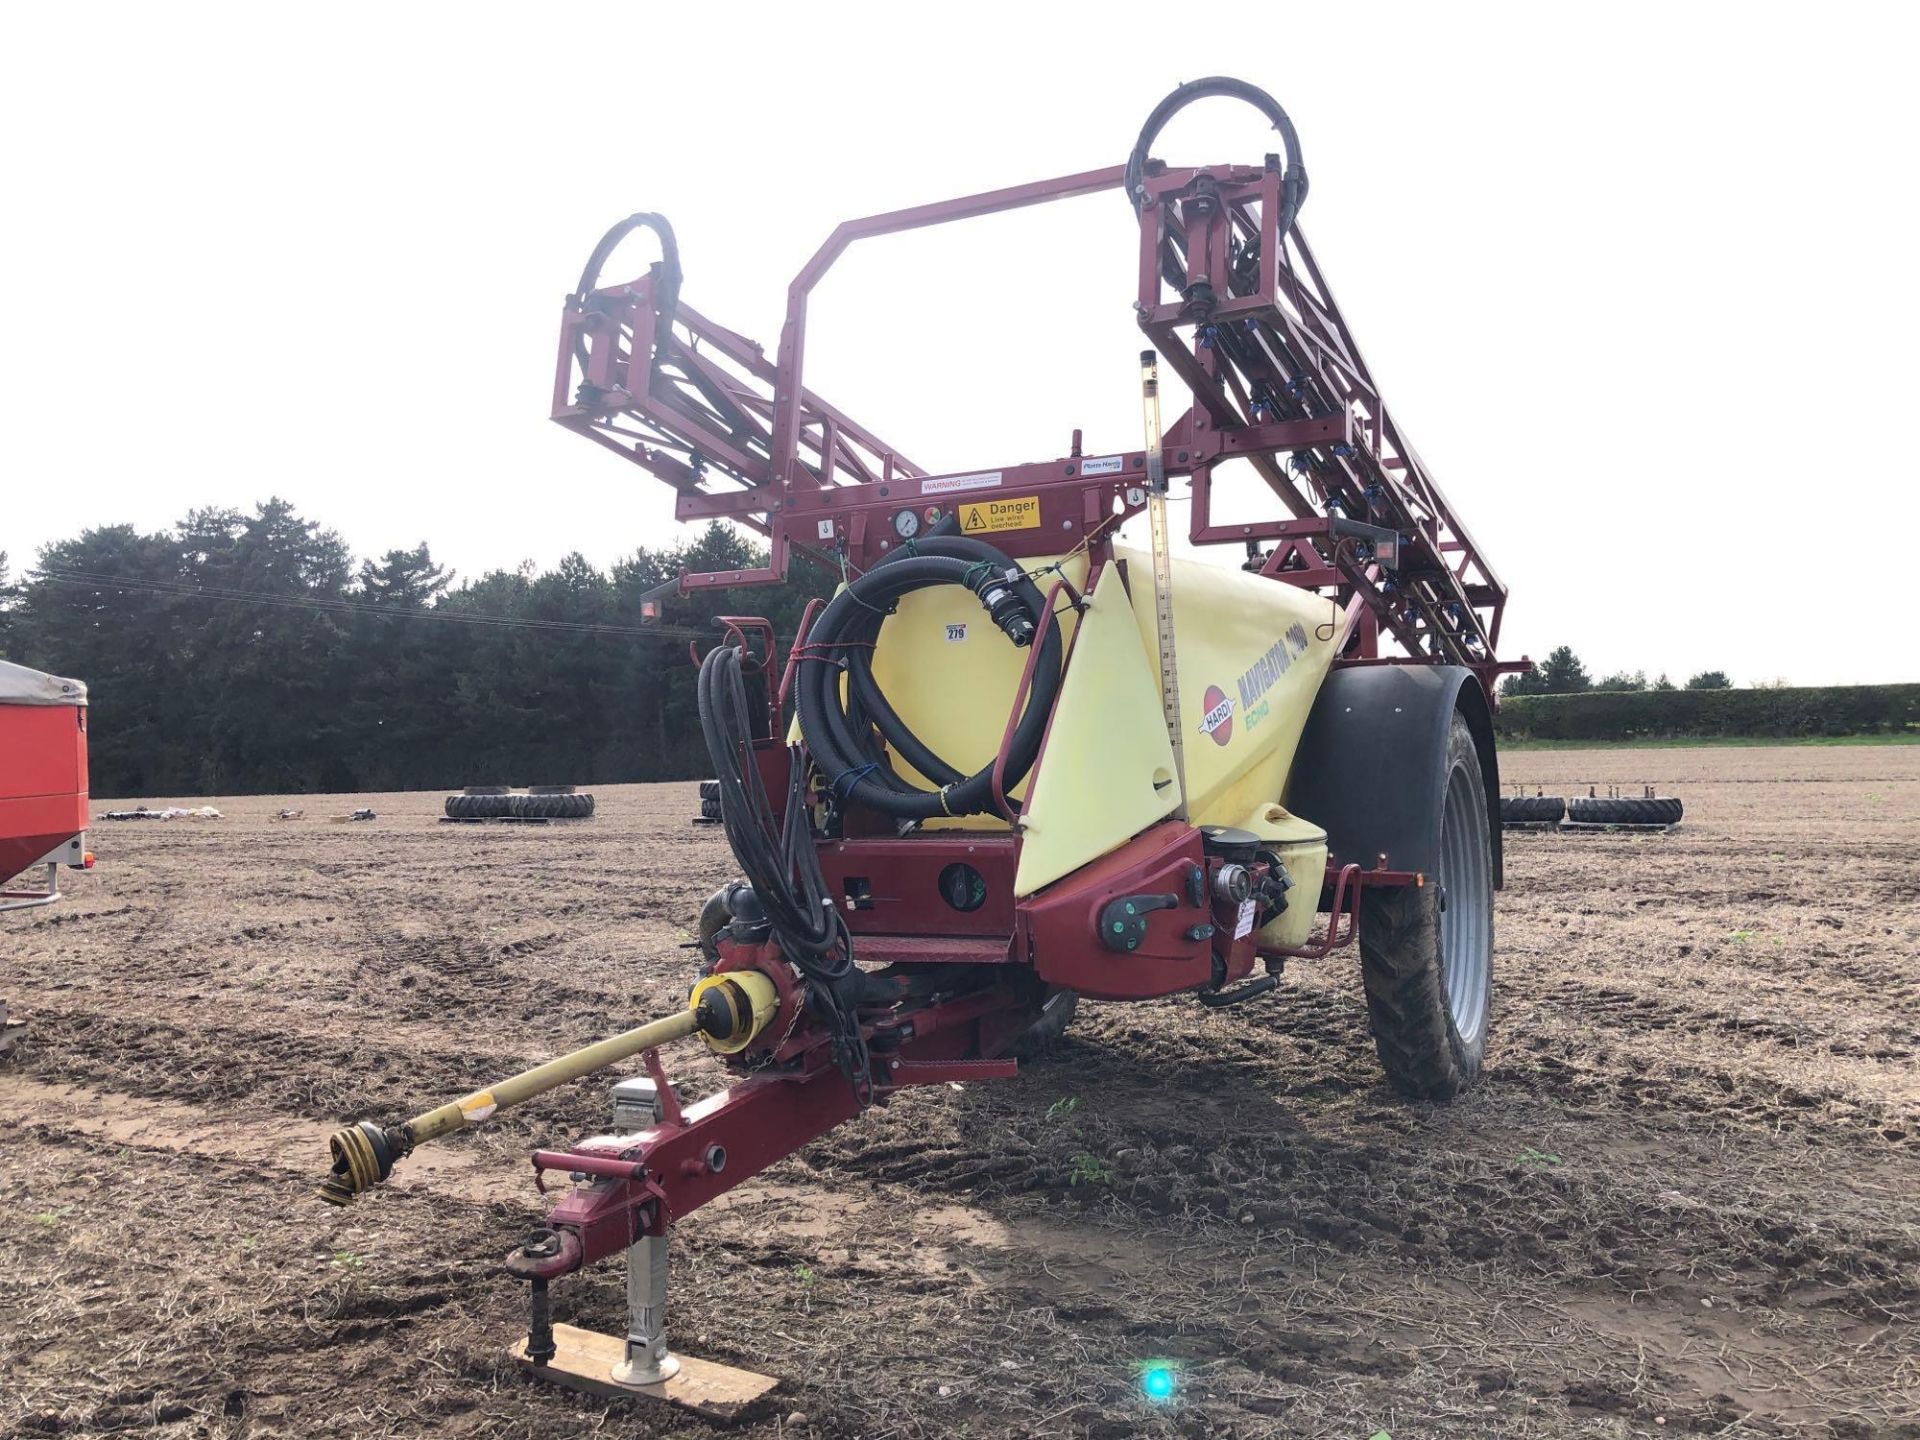 2016 Hardi Navigator 3000 Echo 3000l 20m trailed sprayer with triple nozzles on 300/95R46 wheels and